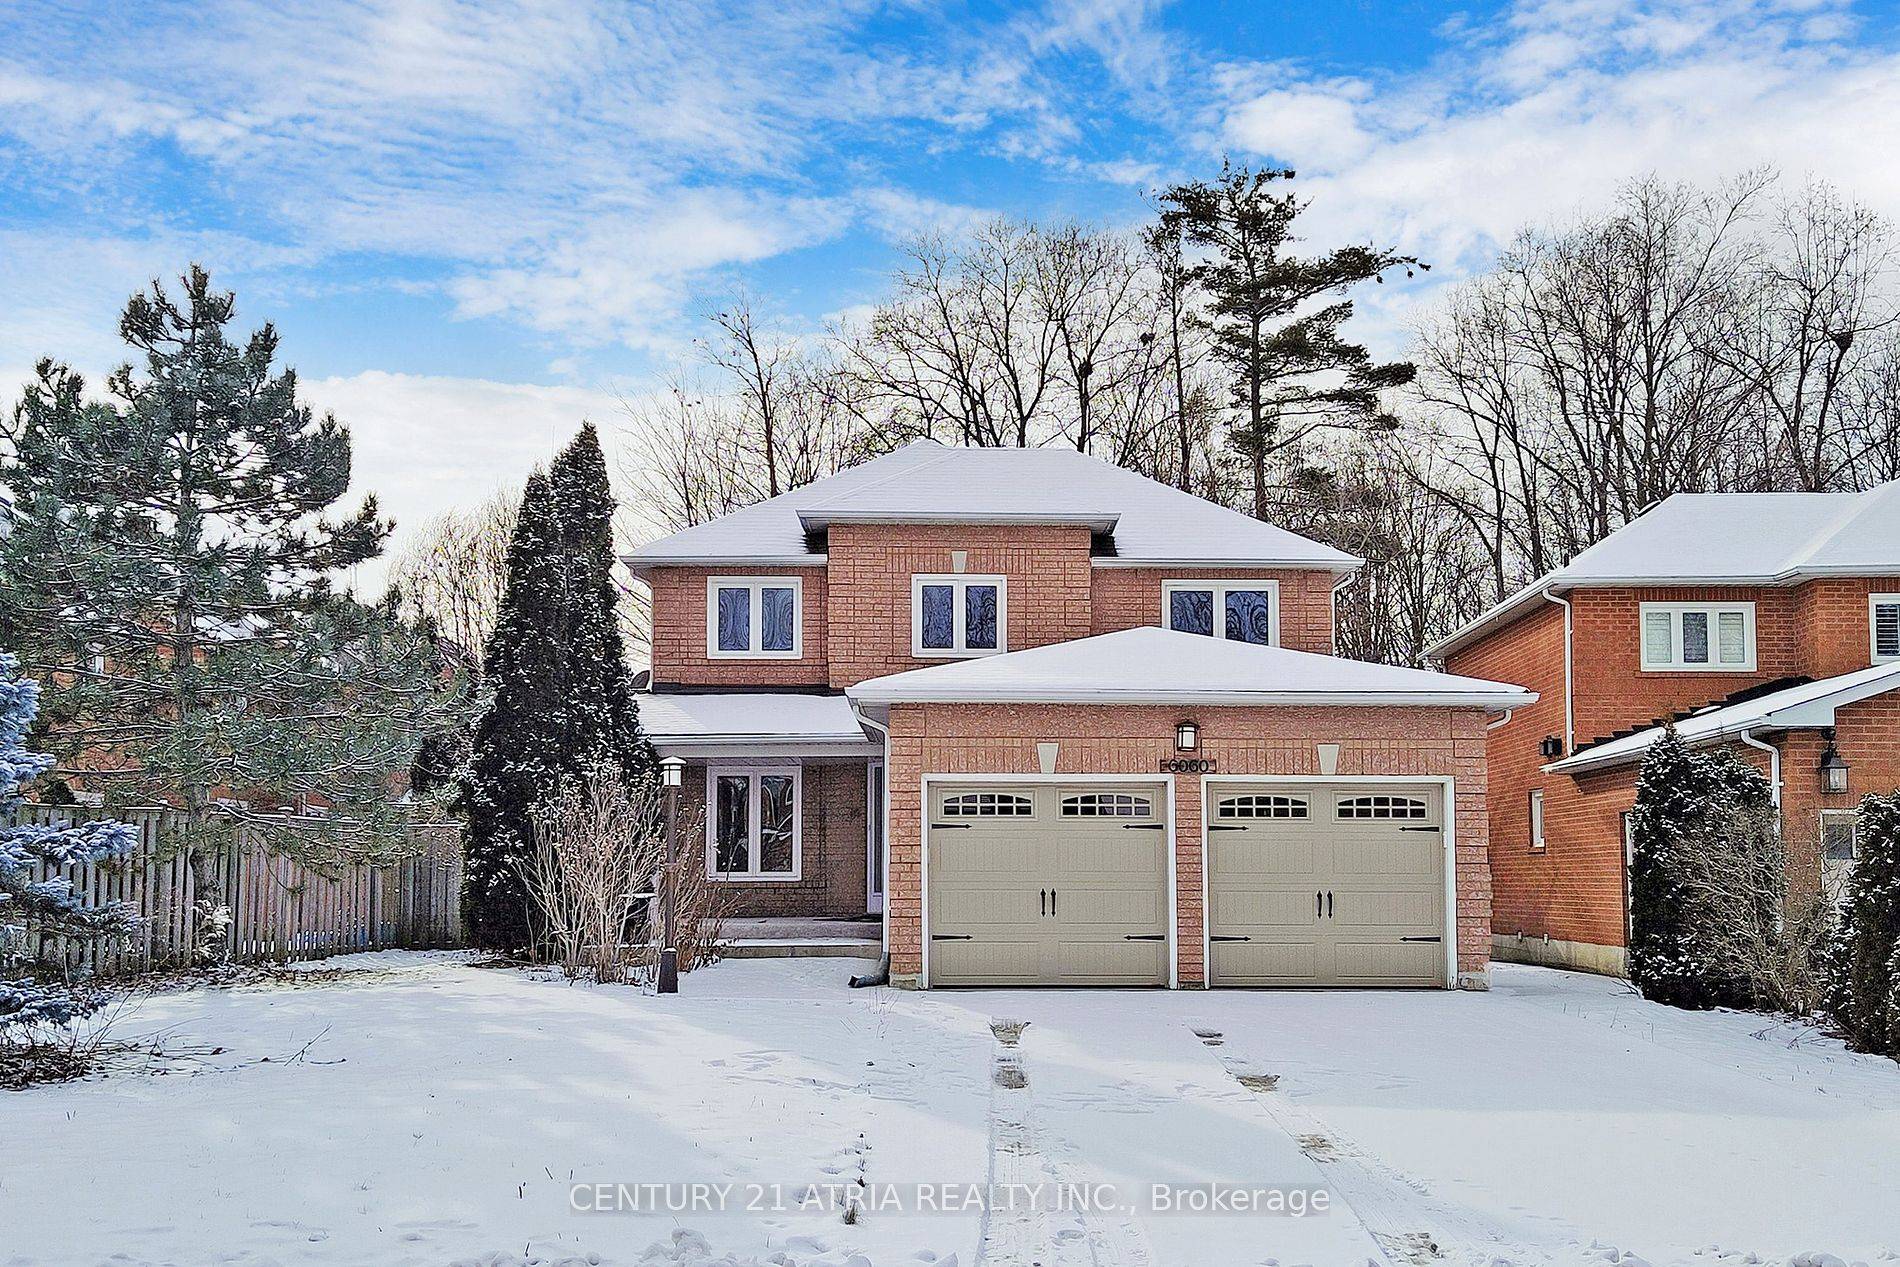 Executive Style home on a Premium lot, located on a Cul de sac ; backing onto greenspace.